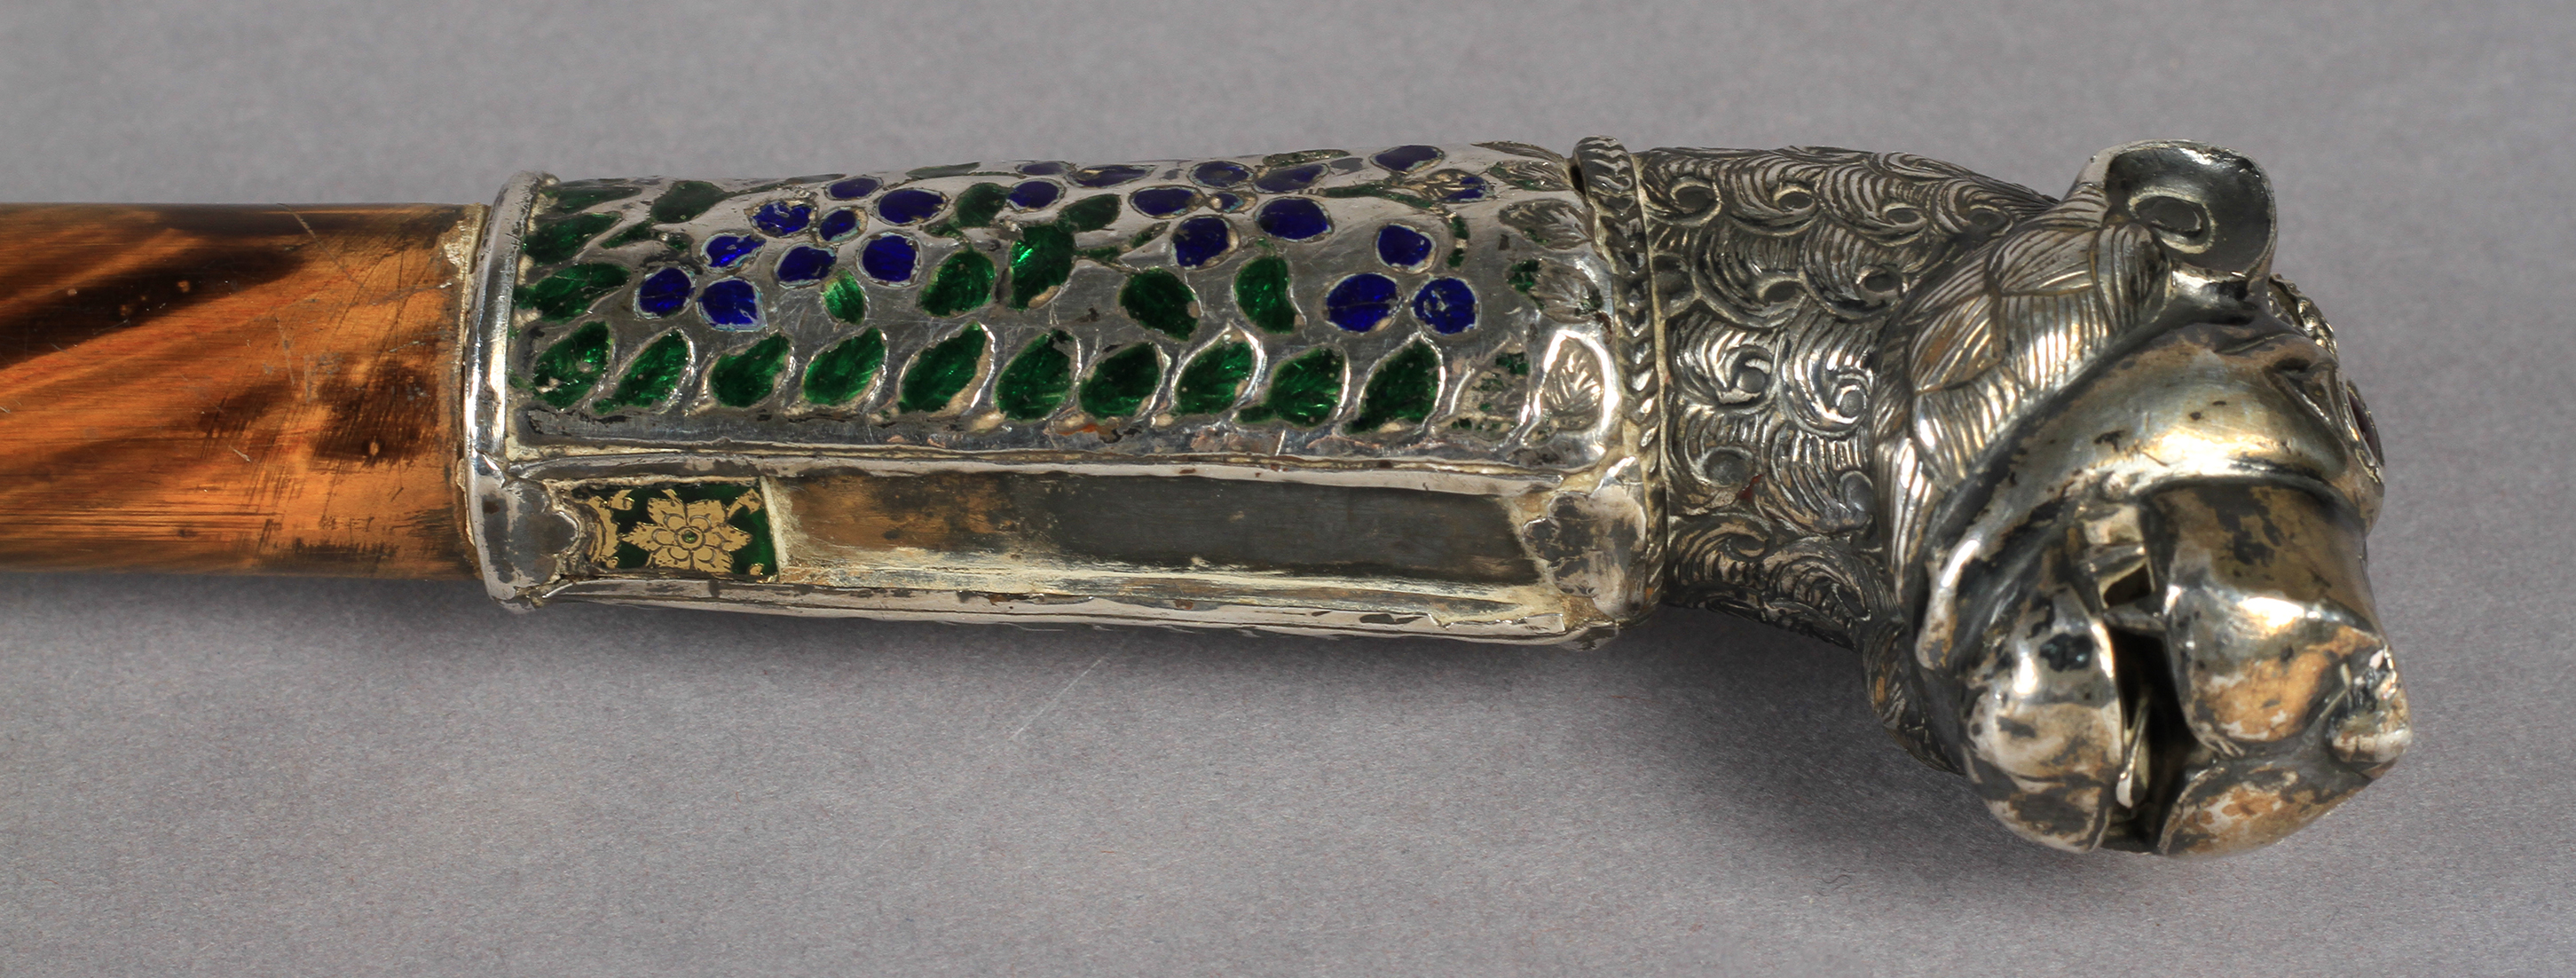 A 19TH CENTURY SILVER COLOURED METAL, ENAMEL AND GLASS WALKING STICK terminal cast as a lion's - Image 3 of 4